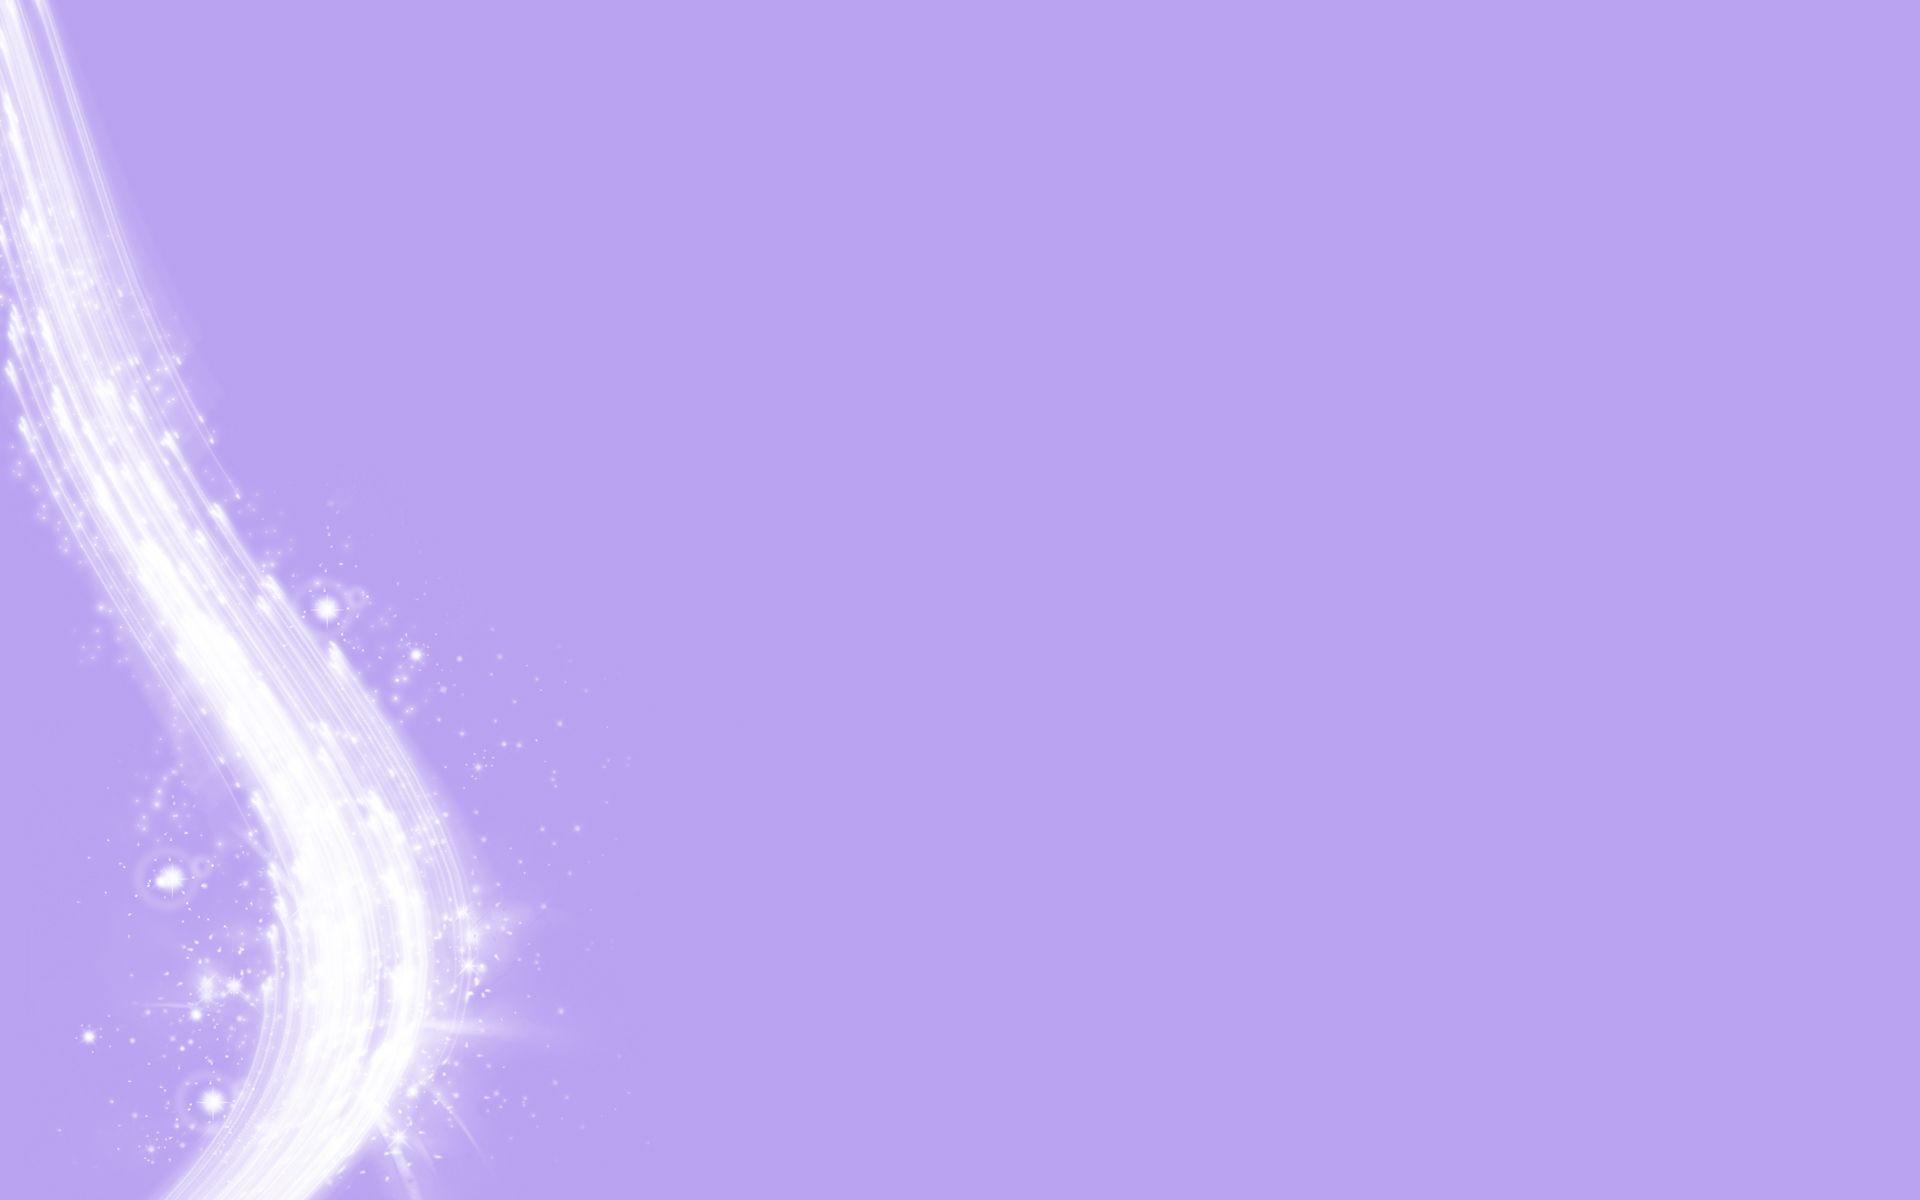 X Lilac Vector Flowers Abstract Desktop Background Free